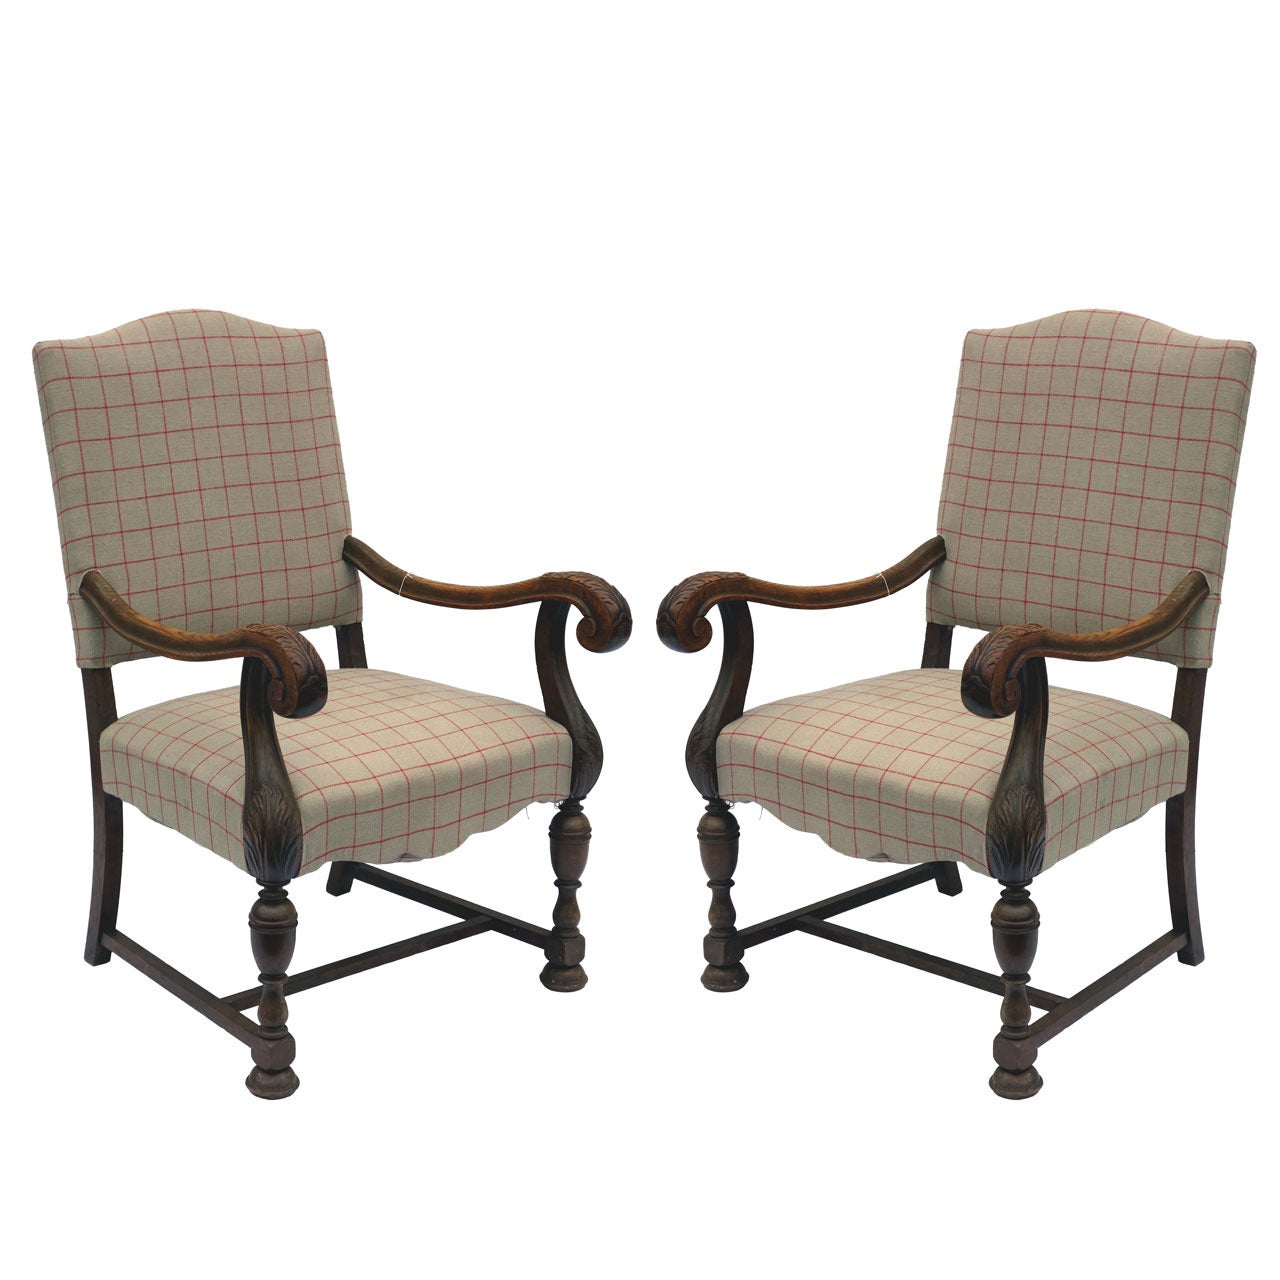 Antique Upholstered Chairs For Sale